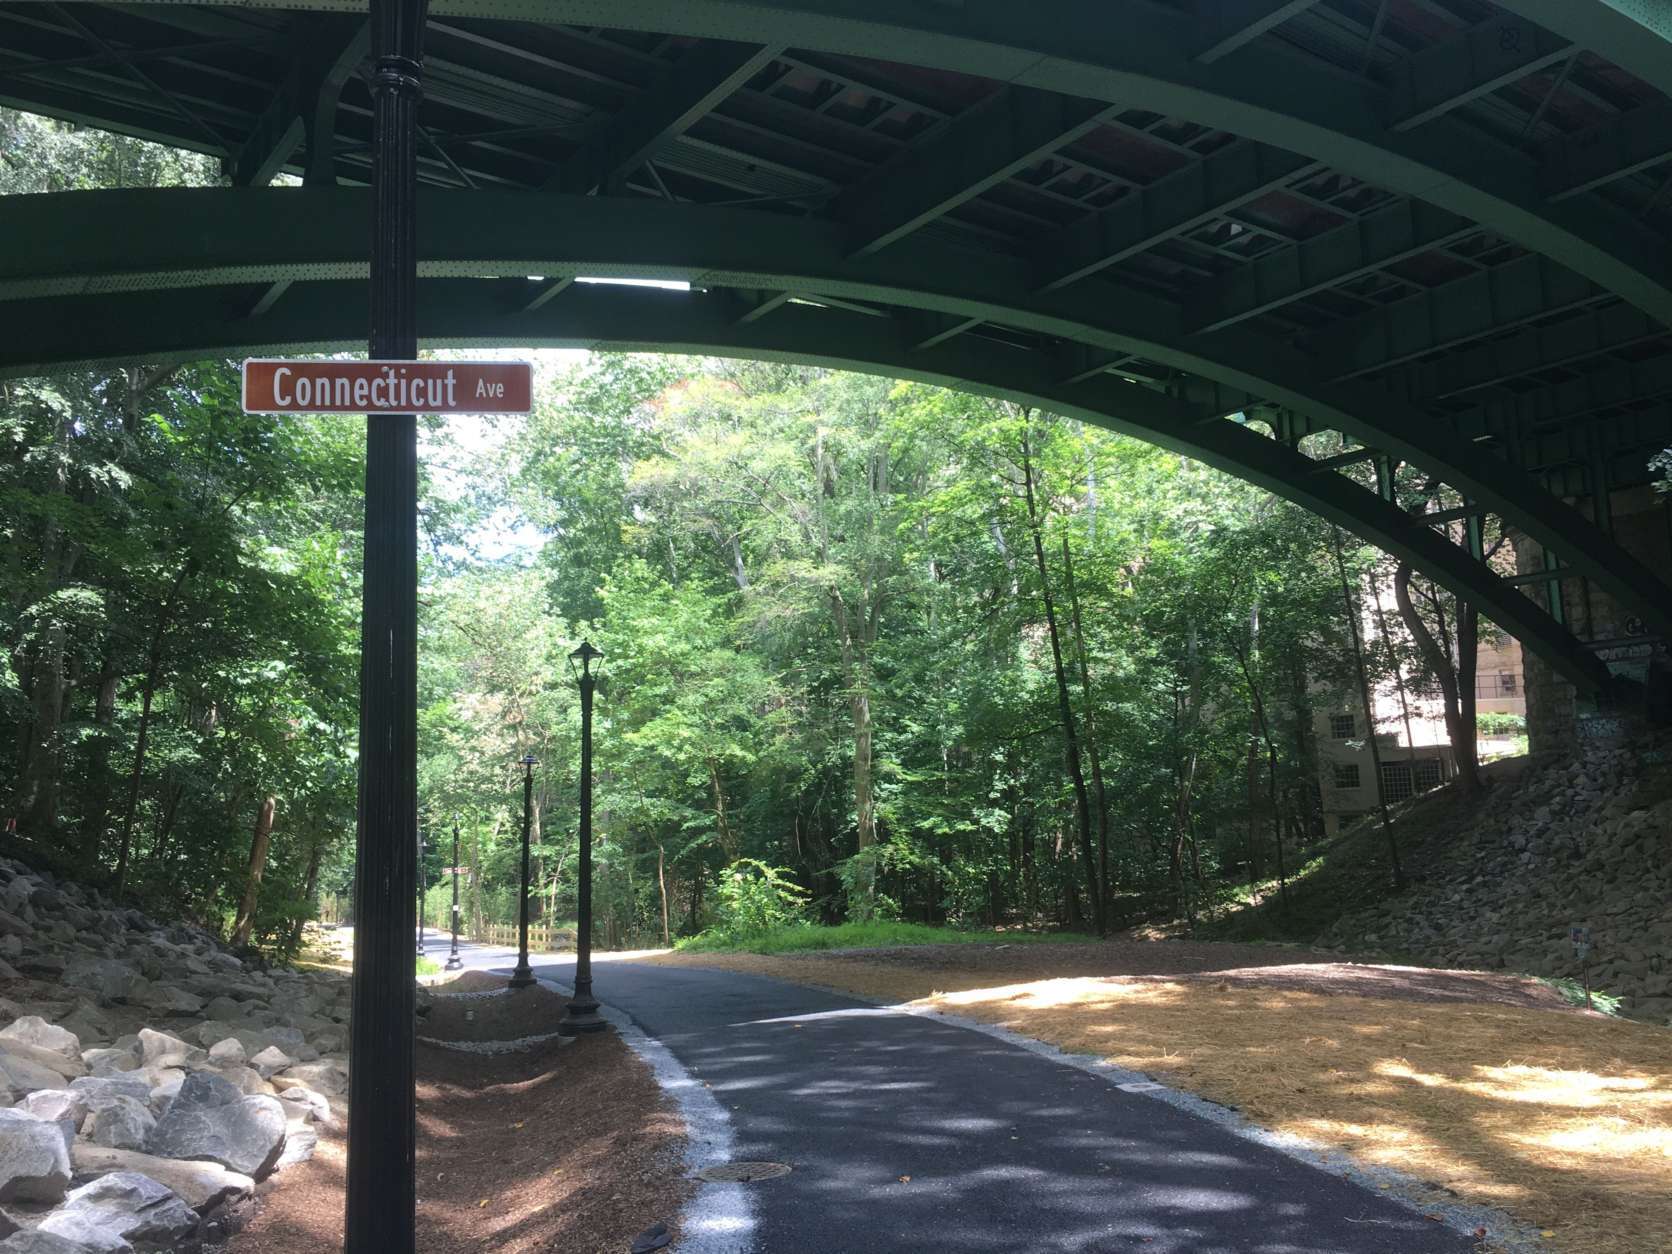 Klingle Valley Trail sits along what was once a stretch of Klingle Road, which was closed after a severe flood in 1991. In 2014, it was featured as one of WTOP’s ghost roads. (WTOP/Mike Murillo)